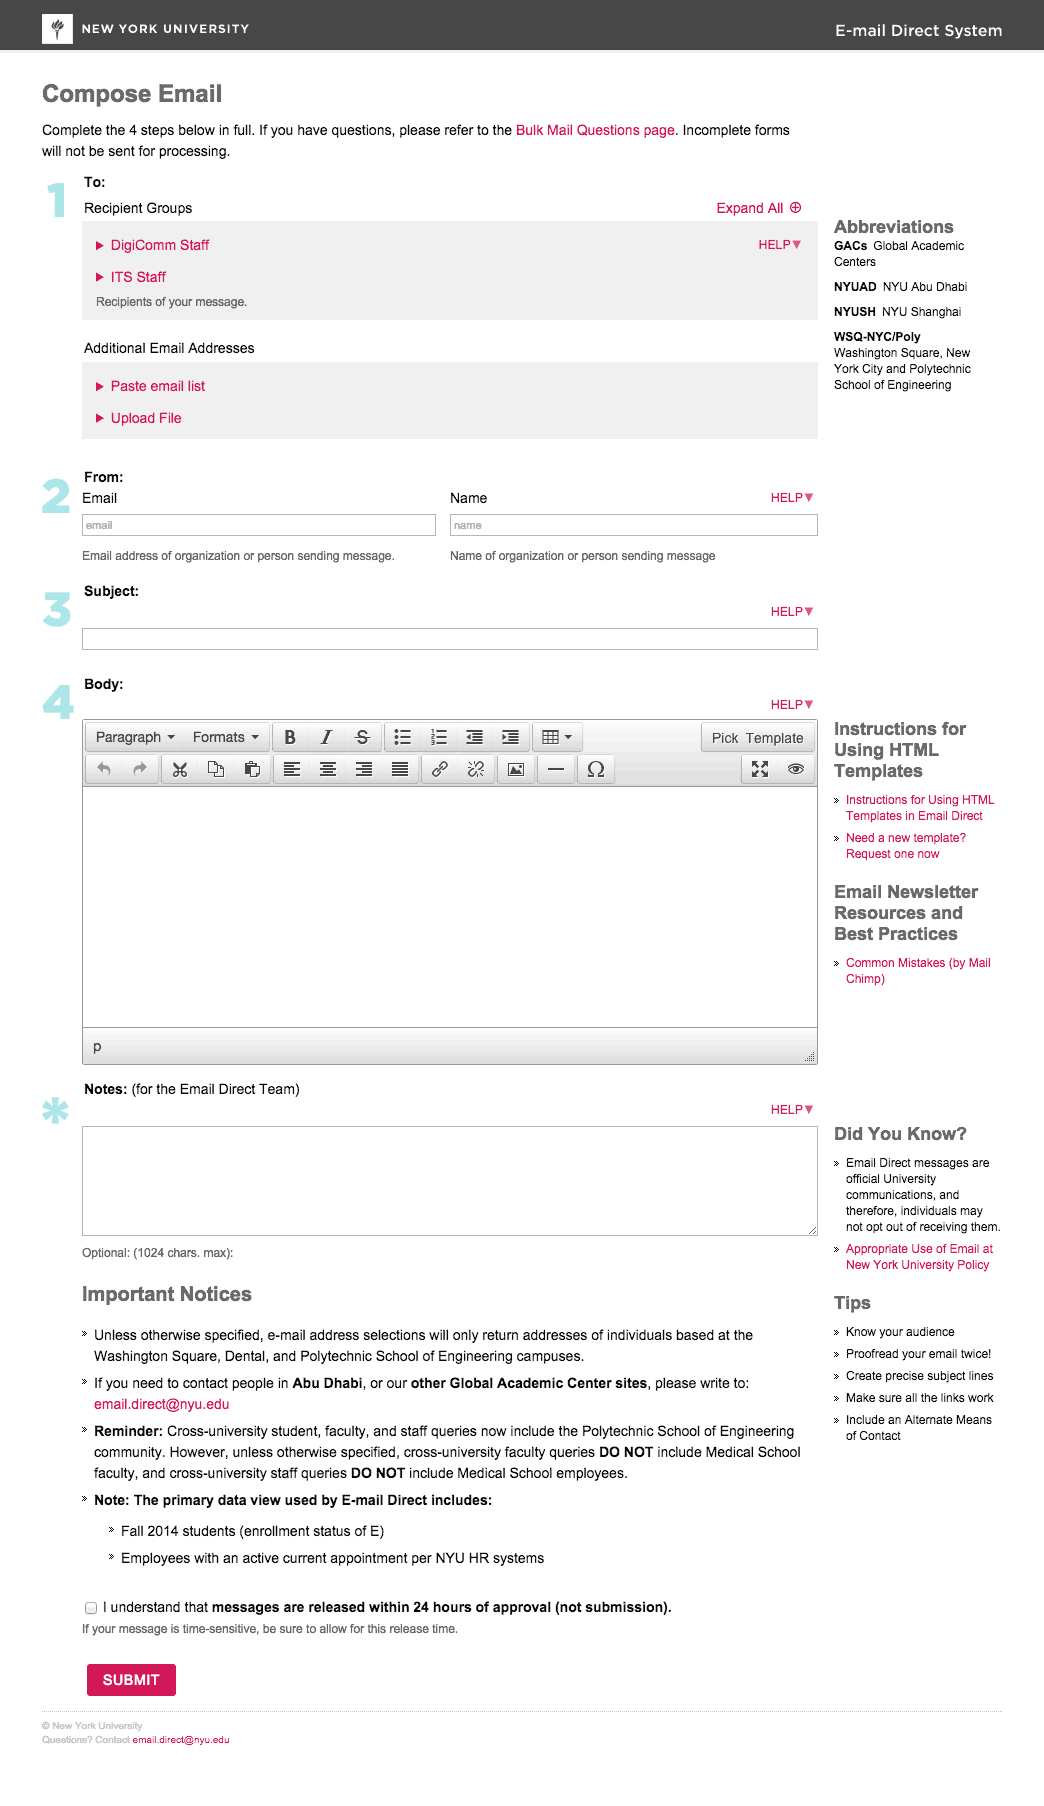 user experience user interface redesign Bulk Email